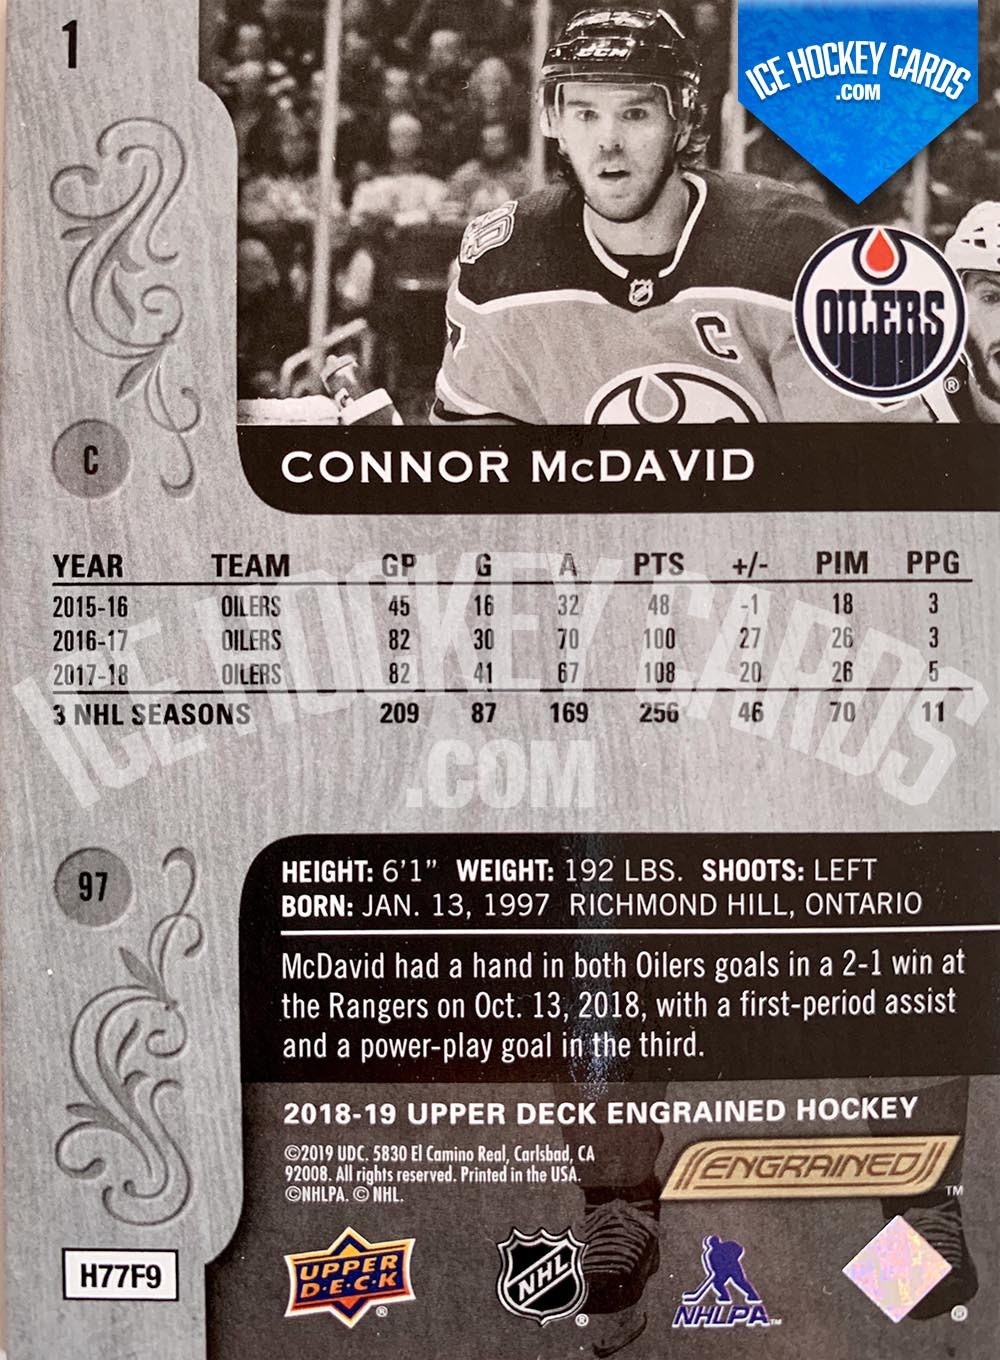 Upper Deck - Engrained 2018-19 - Connor McDavid Base Card # to 49 back